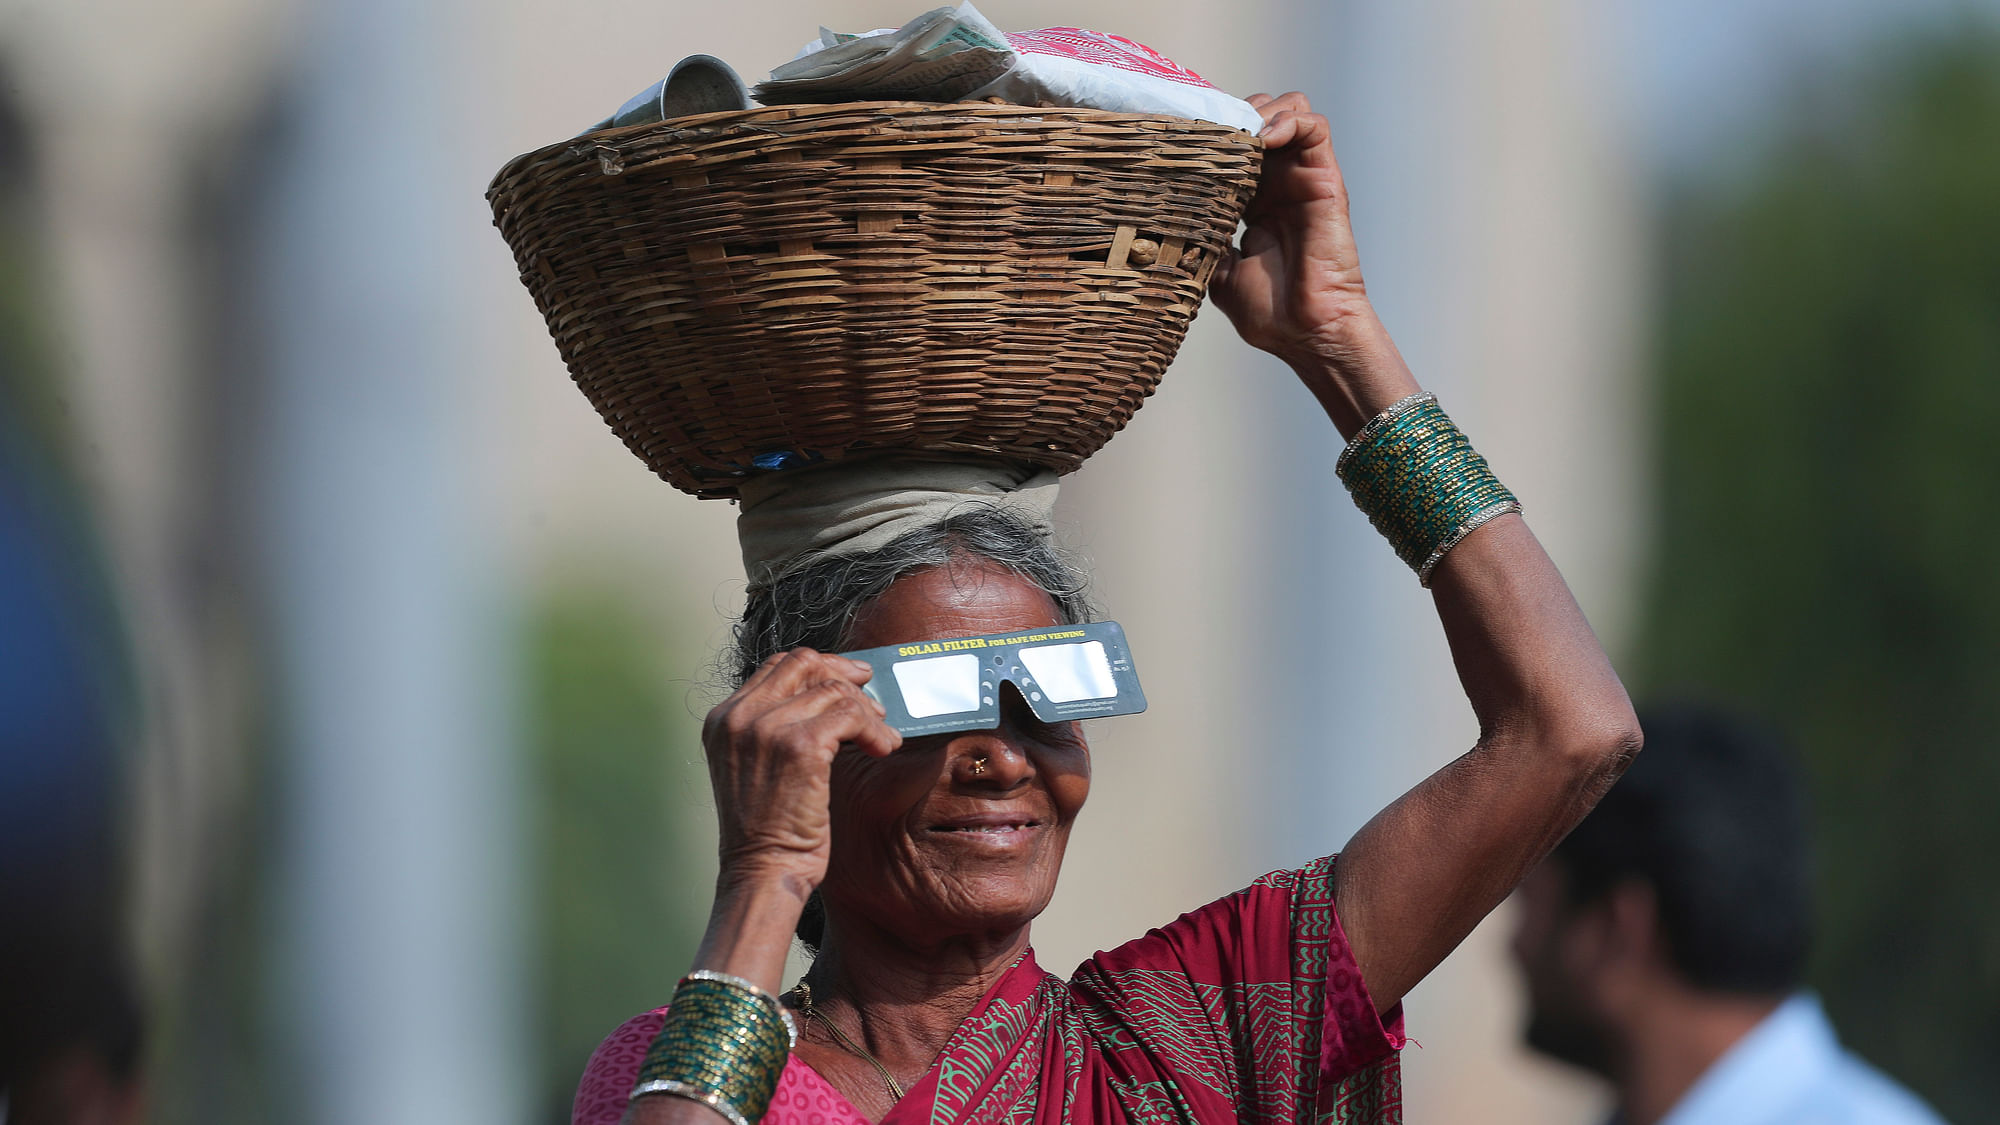 Solar Eclipse 2019 (Surya Grahan) Photos: A roadside vendor holds a special filter and watches a partial solar eclipse in Hyderabad.